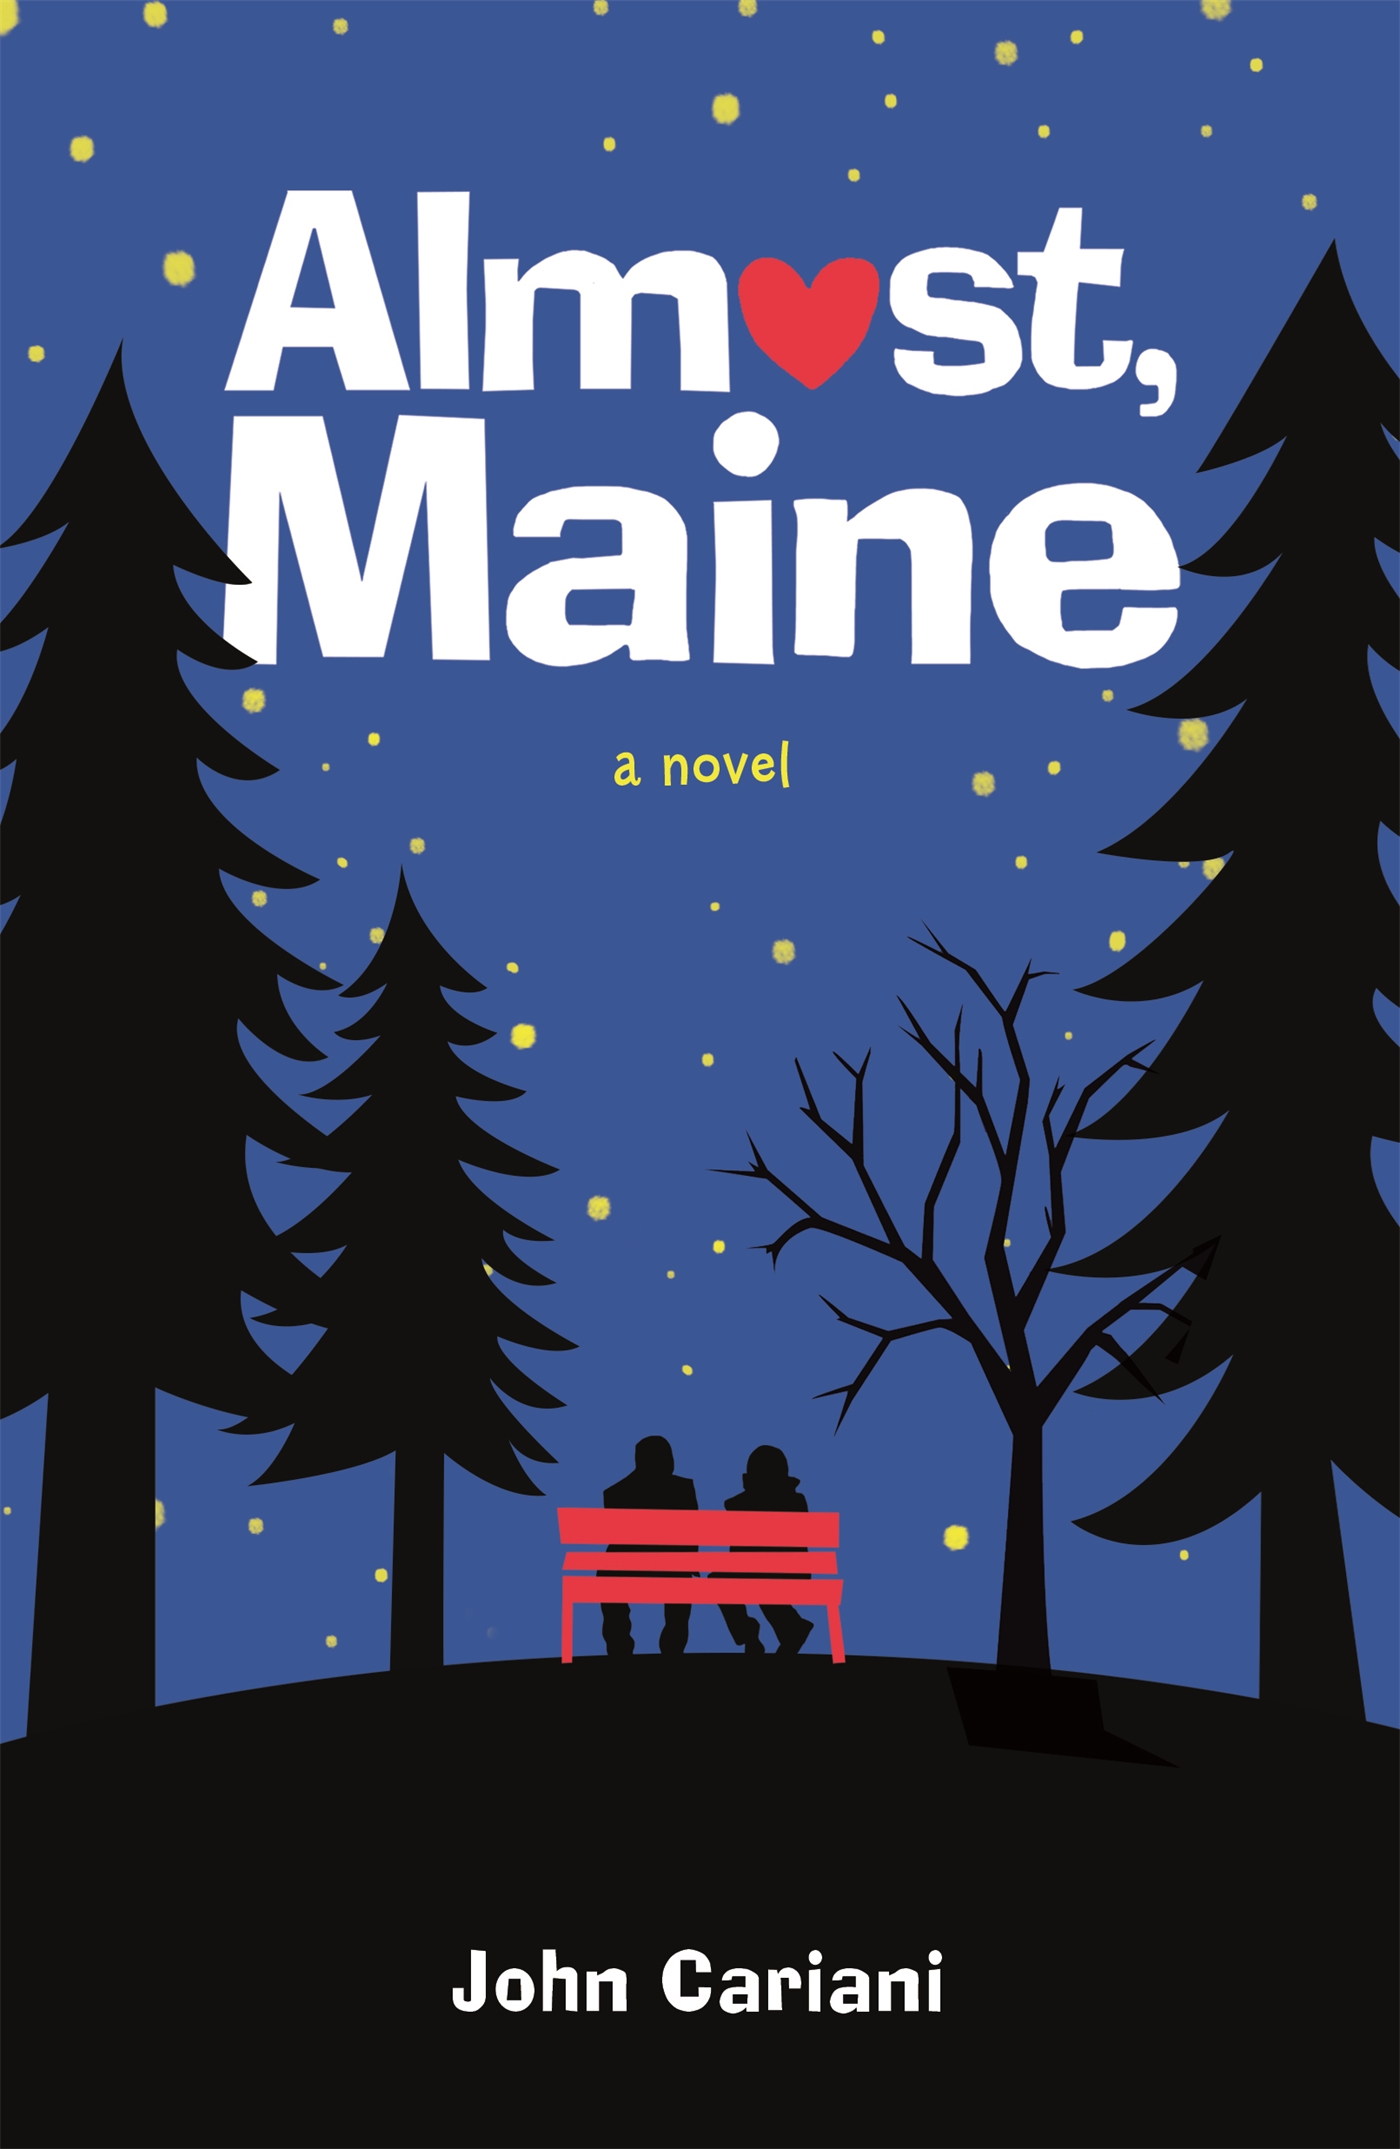 Images for Almost, Maine